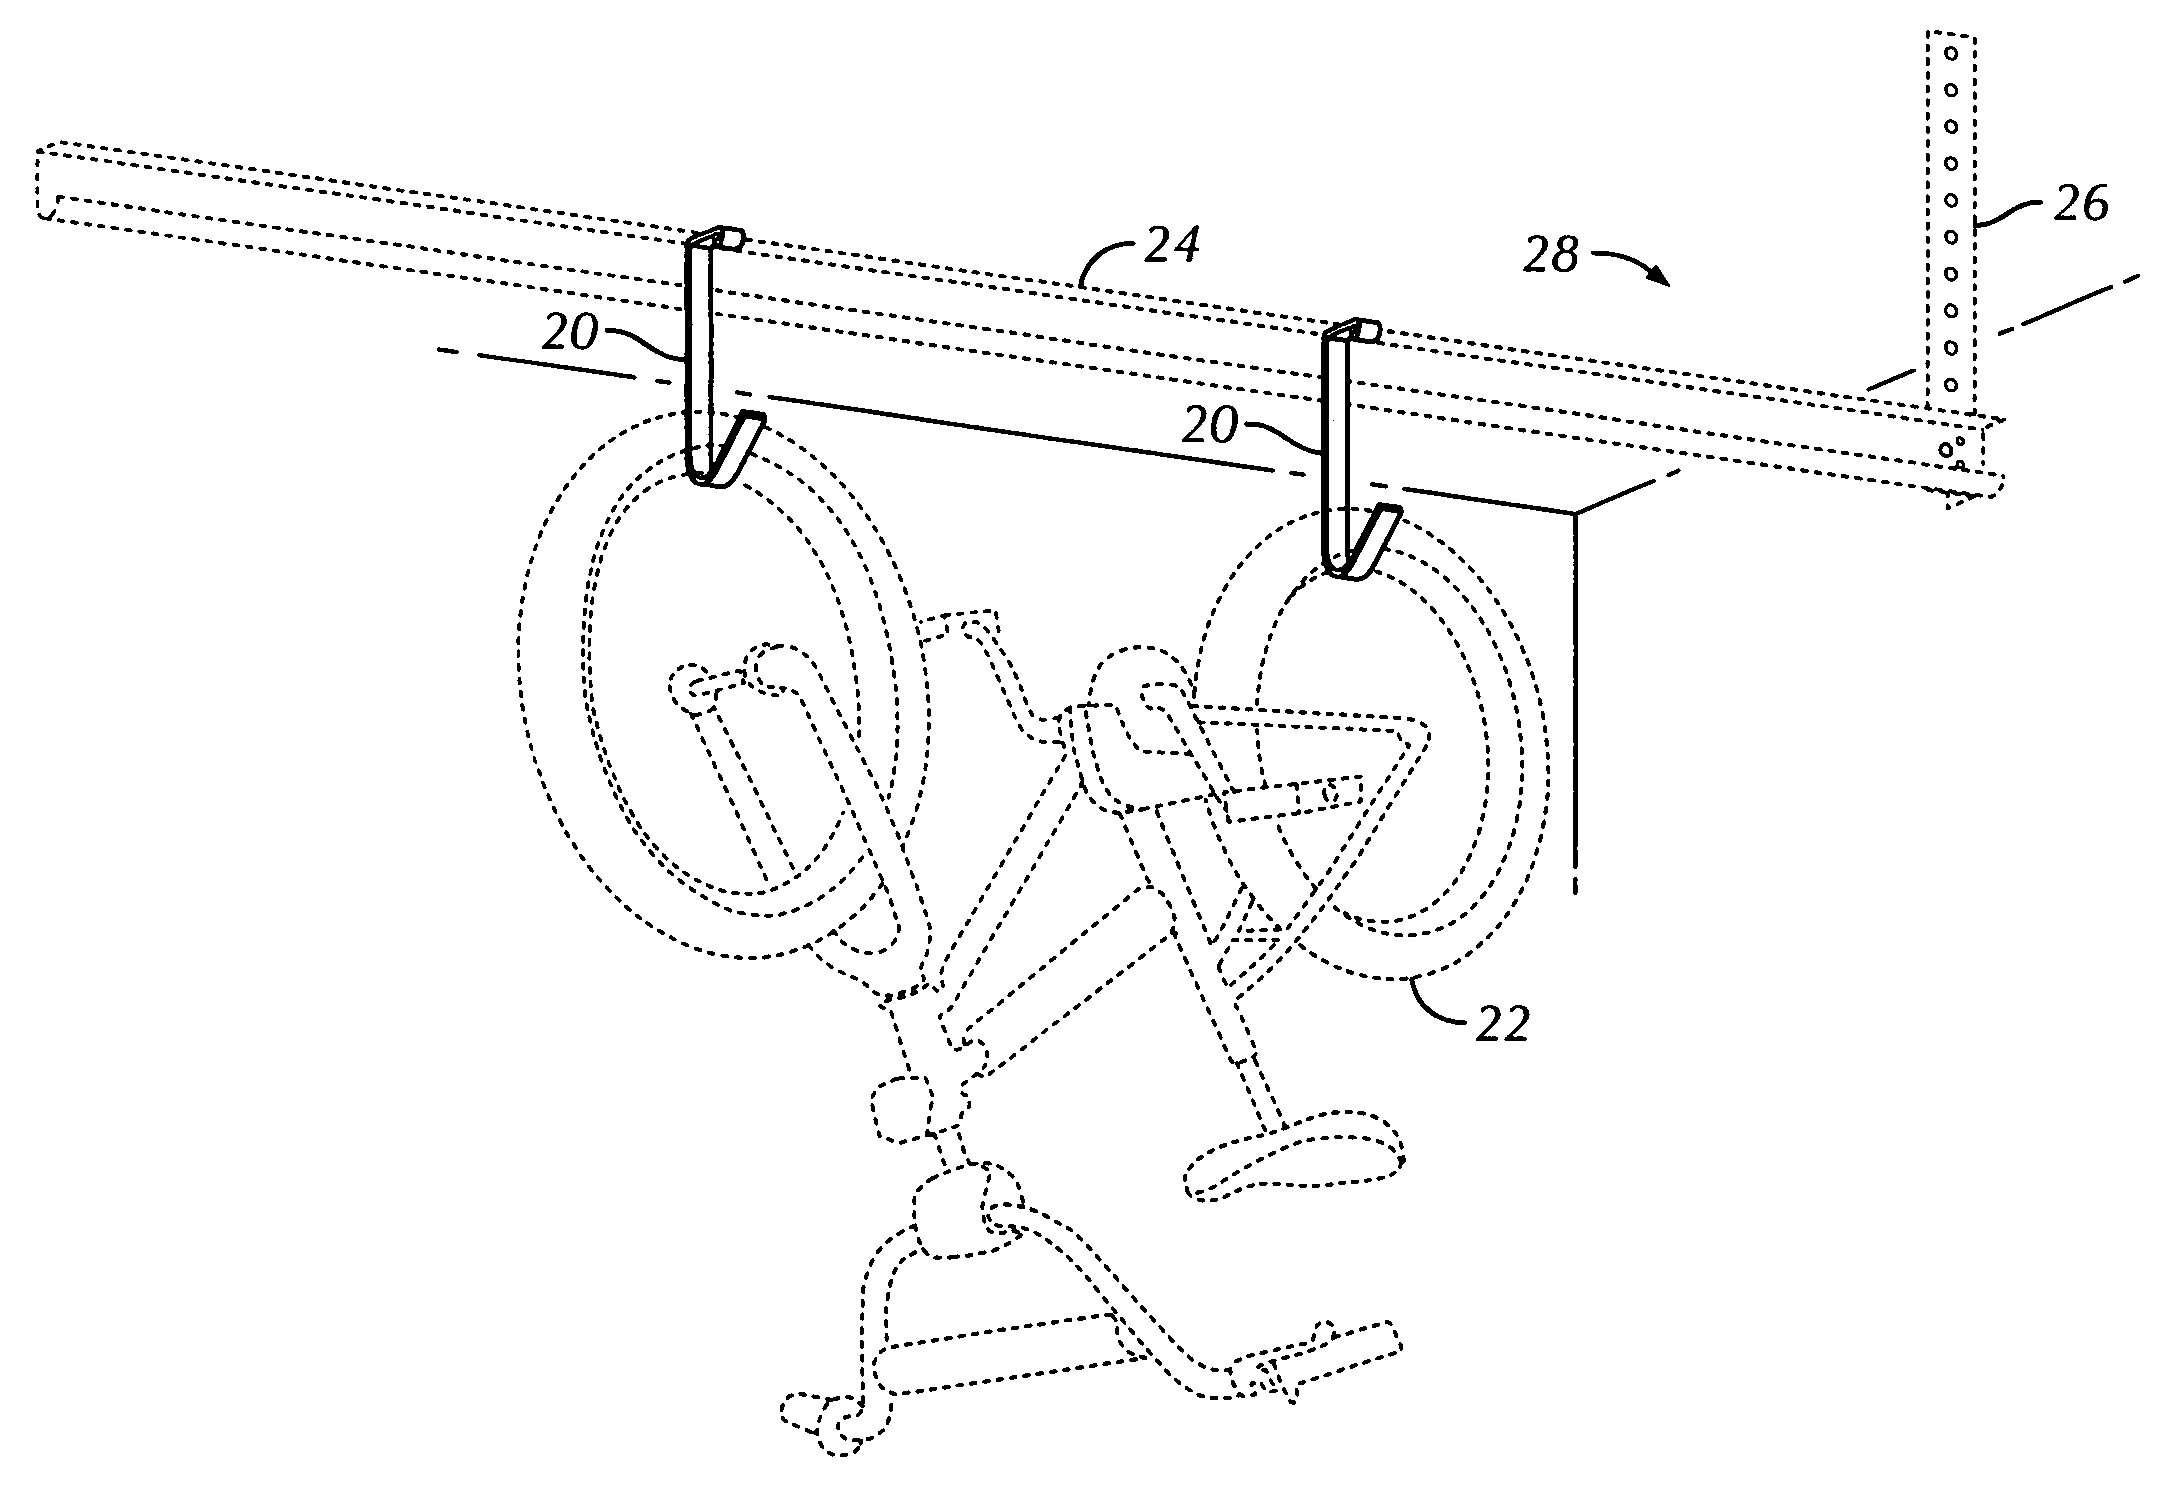 Utility hook for attachment to an overhead garage door track